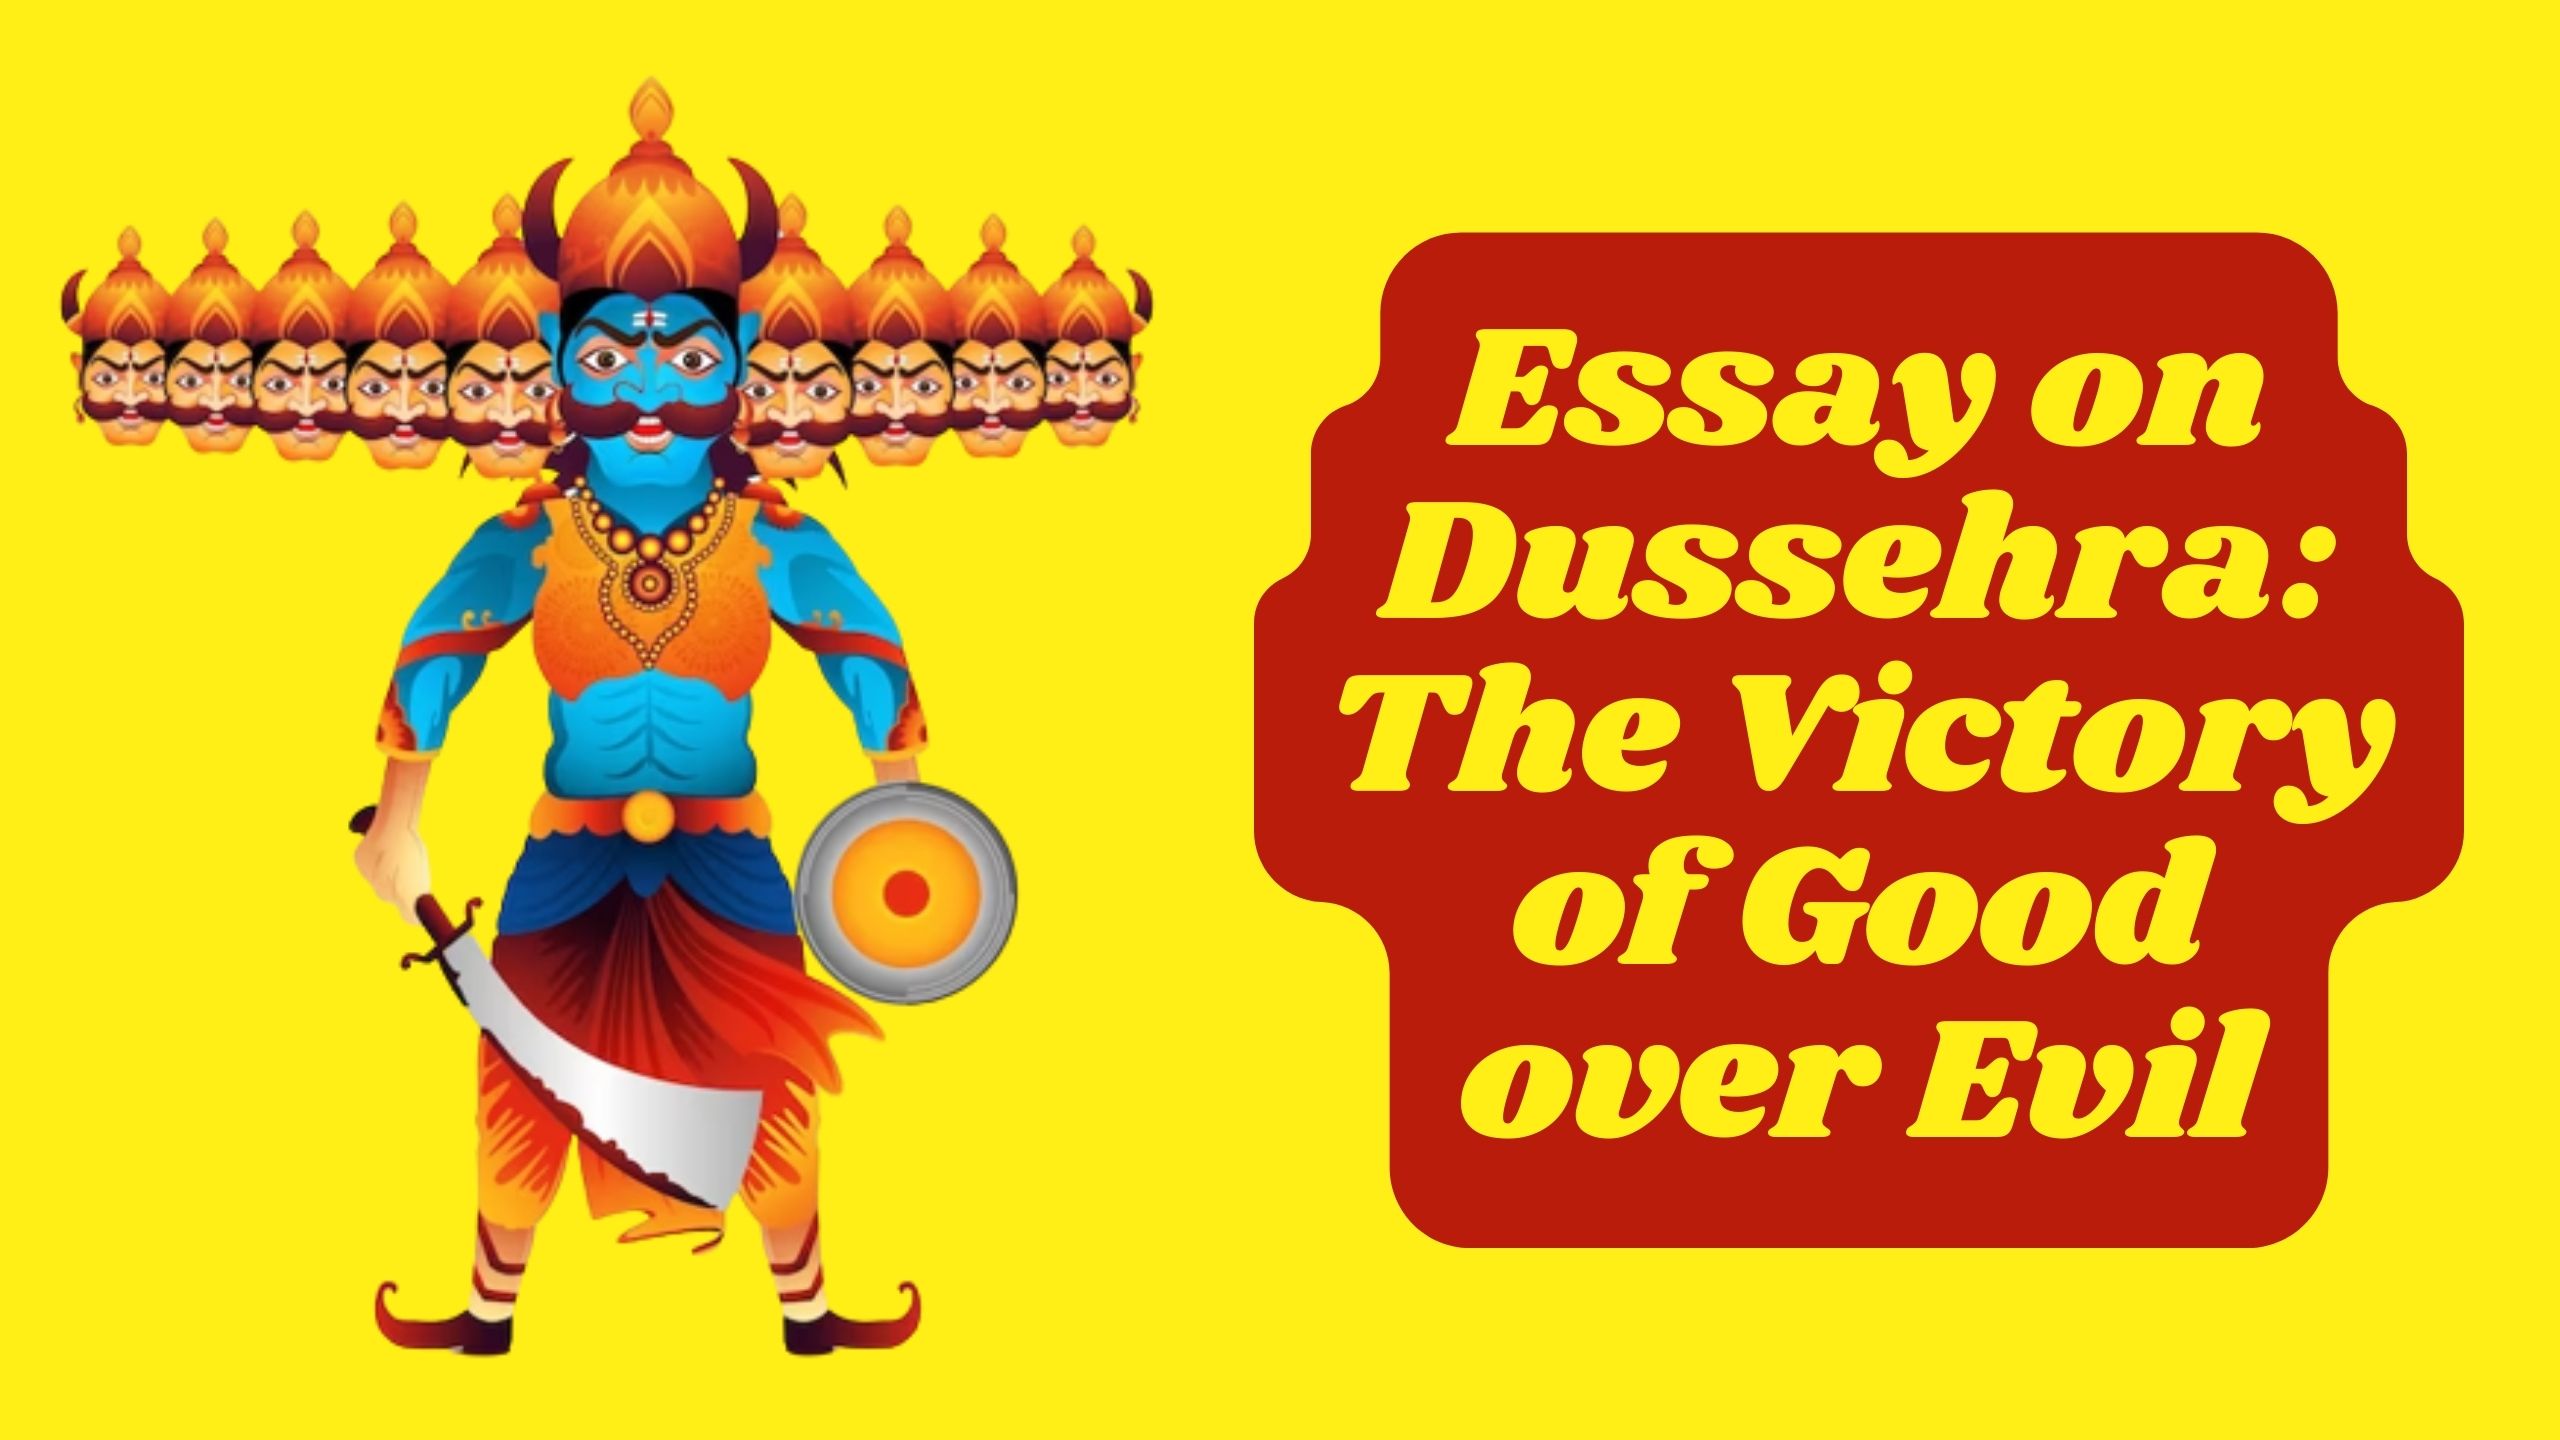 Essay on Dussehra: The Victory of Good over Evil